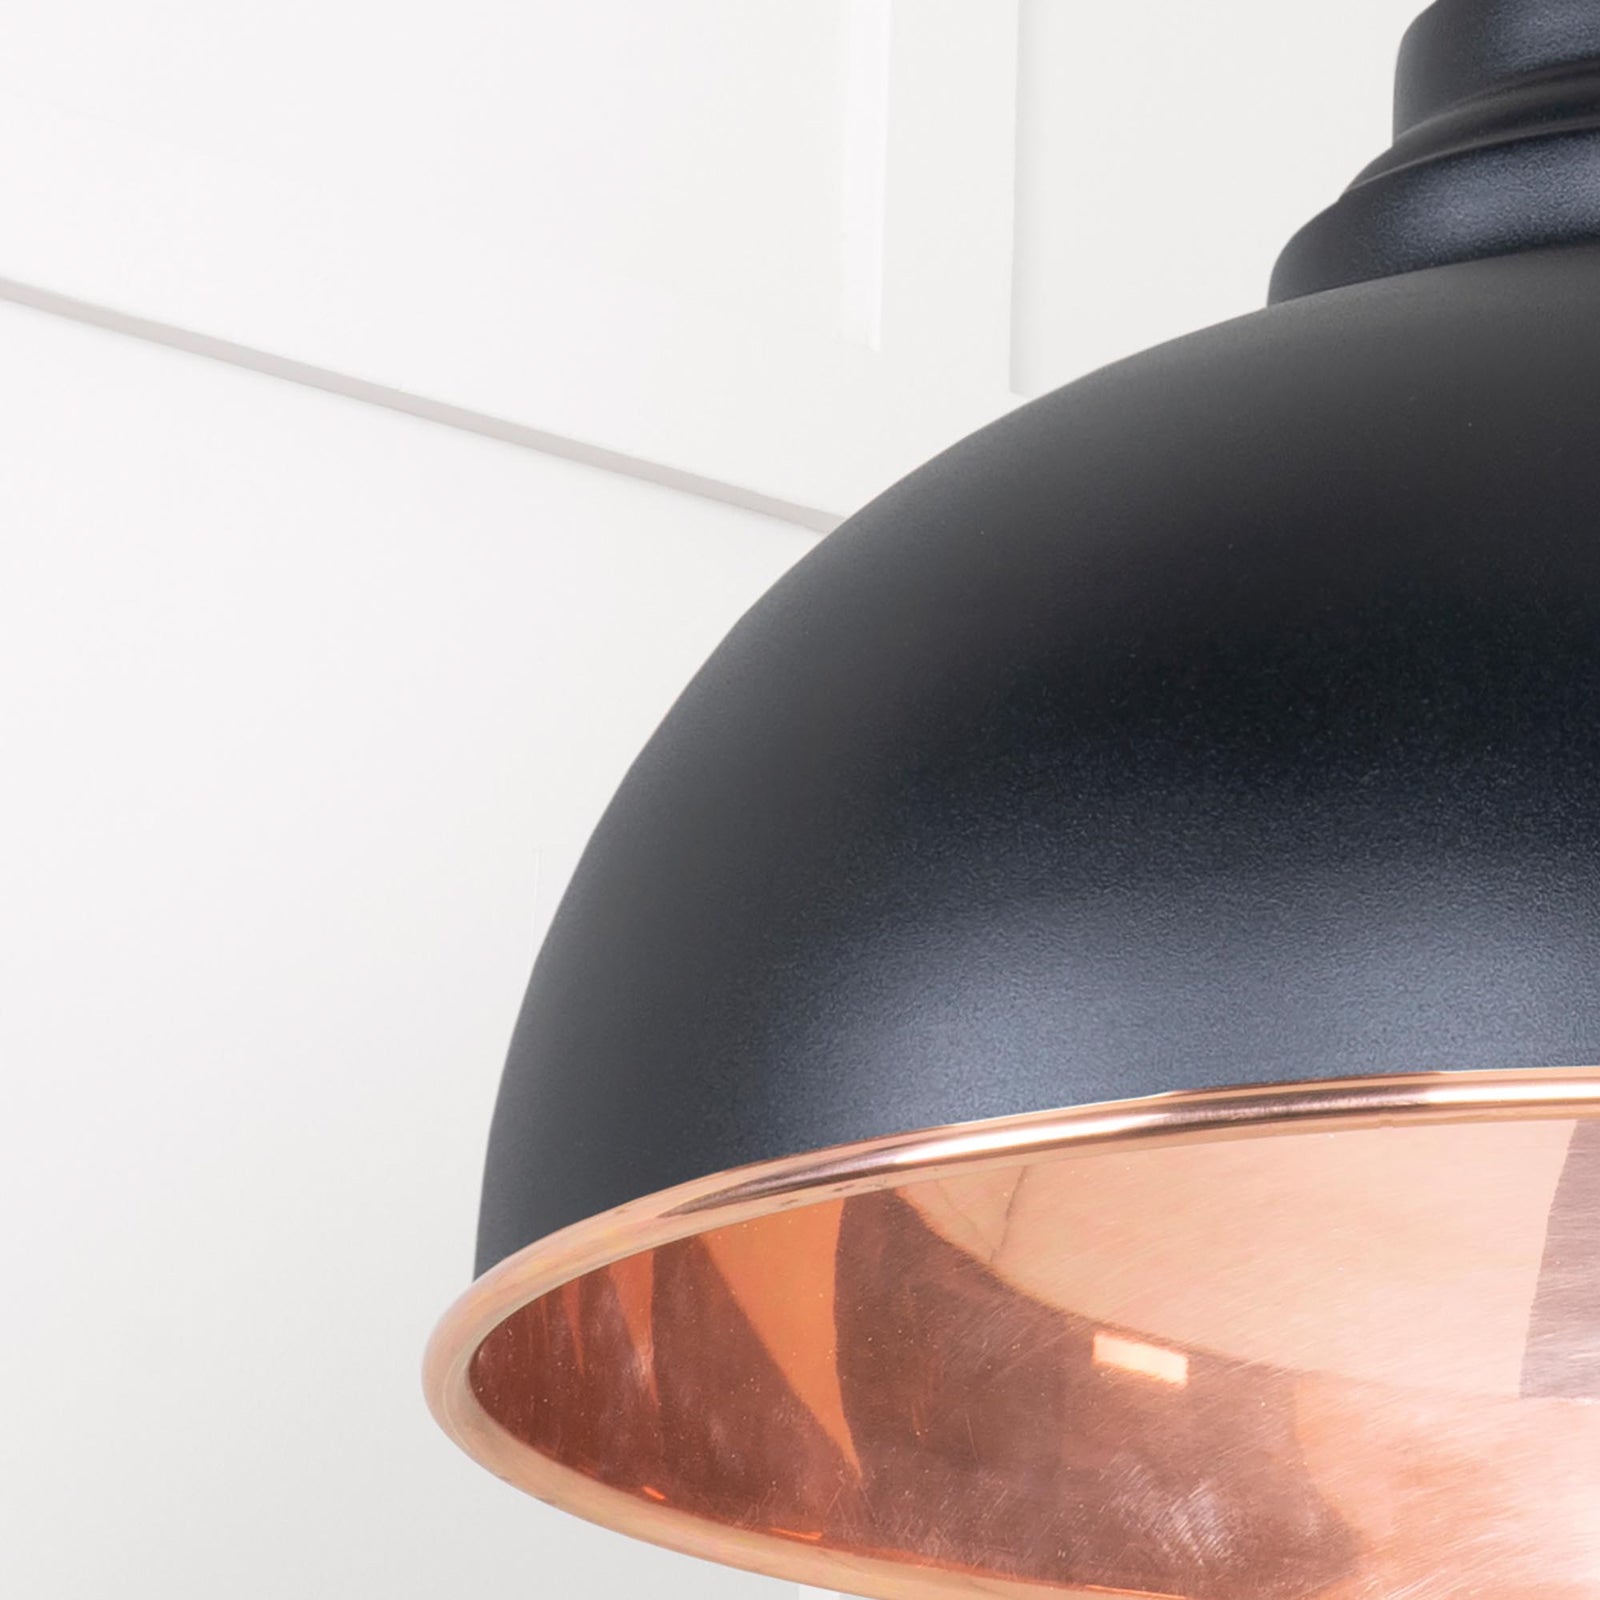 SHOW Close Up Image Harborne Ceiling Light in Elan Black In Smooth Copper